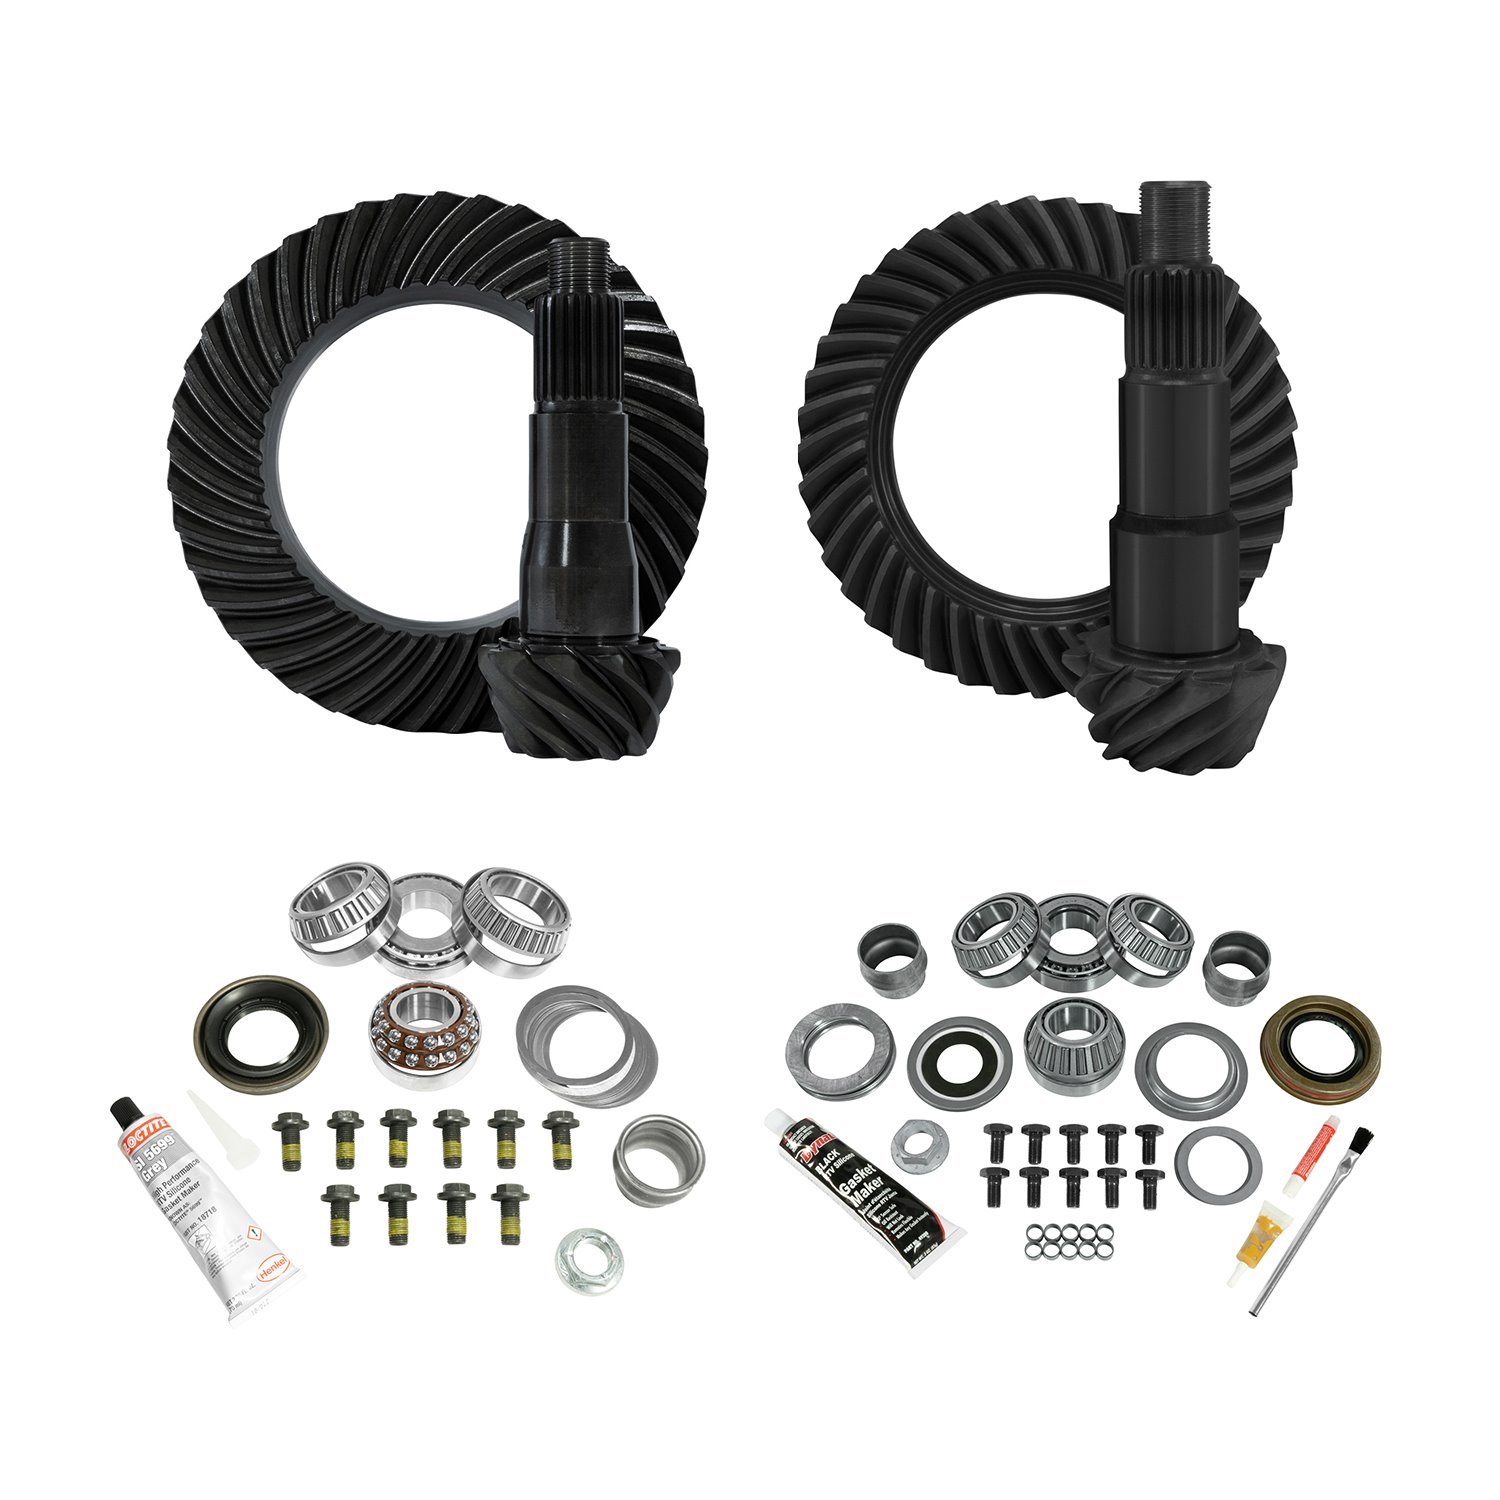 Re-Gear And Install Kit, D30 Front/D35 Rear, Jeep Jl Non-Rubicon, 3.73